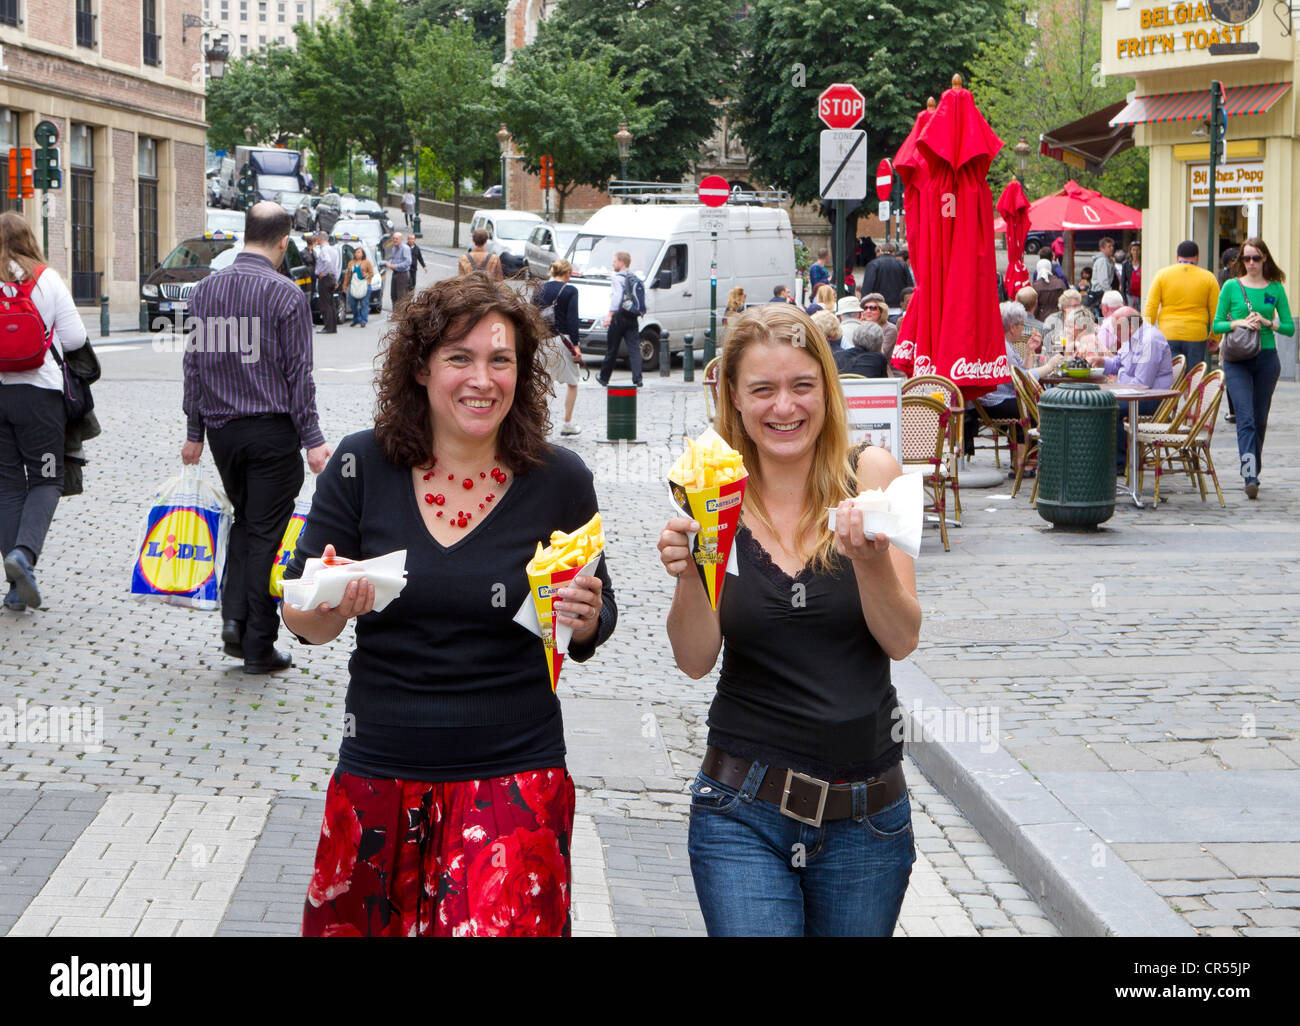 chips french fries belgium frites bruxelles woman women girl girls female females street snack food happy smile smiling 2 two Stock Photo